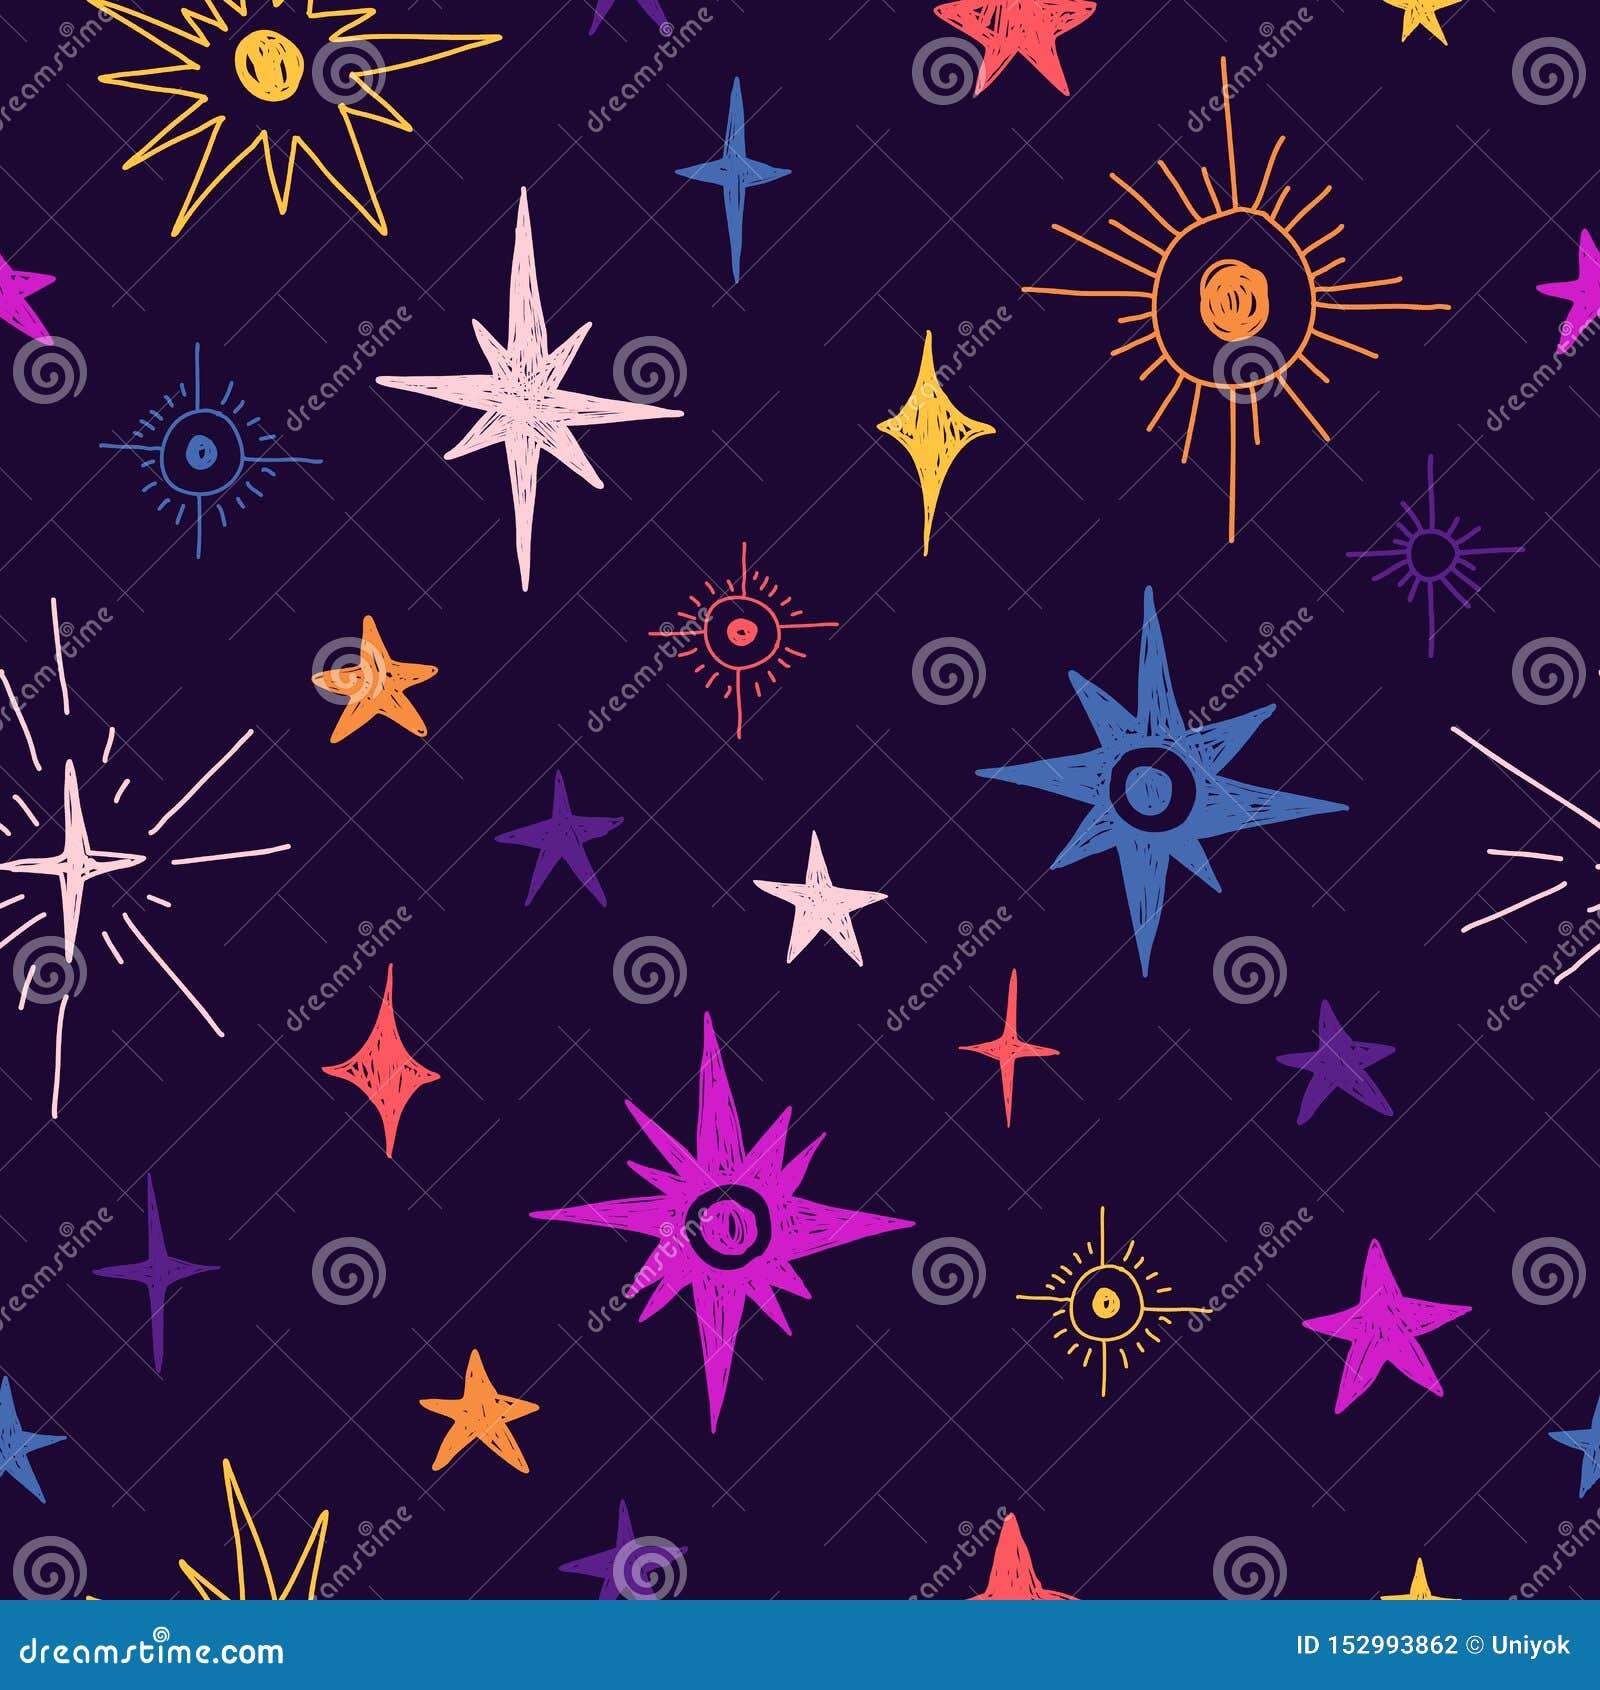 Seamless Pattern with Space Elements. Cartoon Style Wallpaper with Cosmic  Star Stock Vector - Illustration of doodle, kids: 152993862